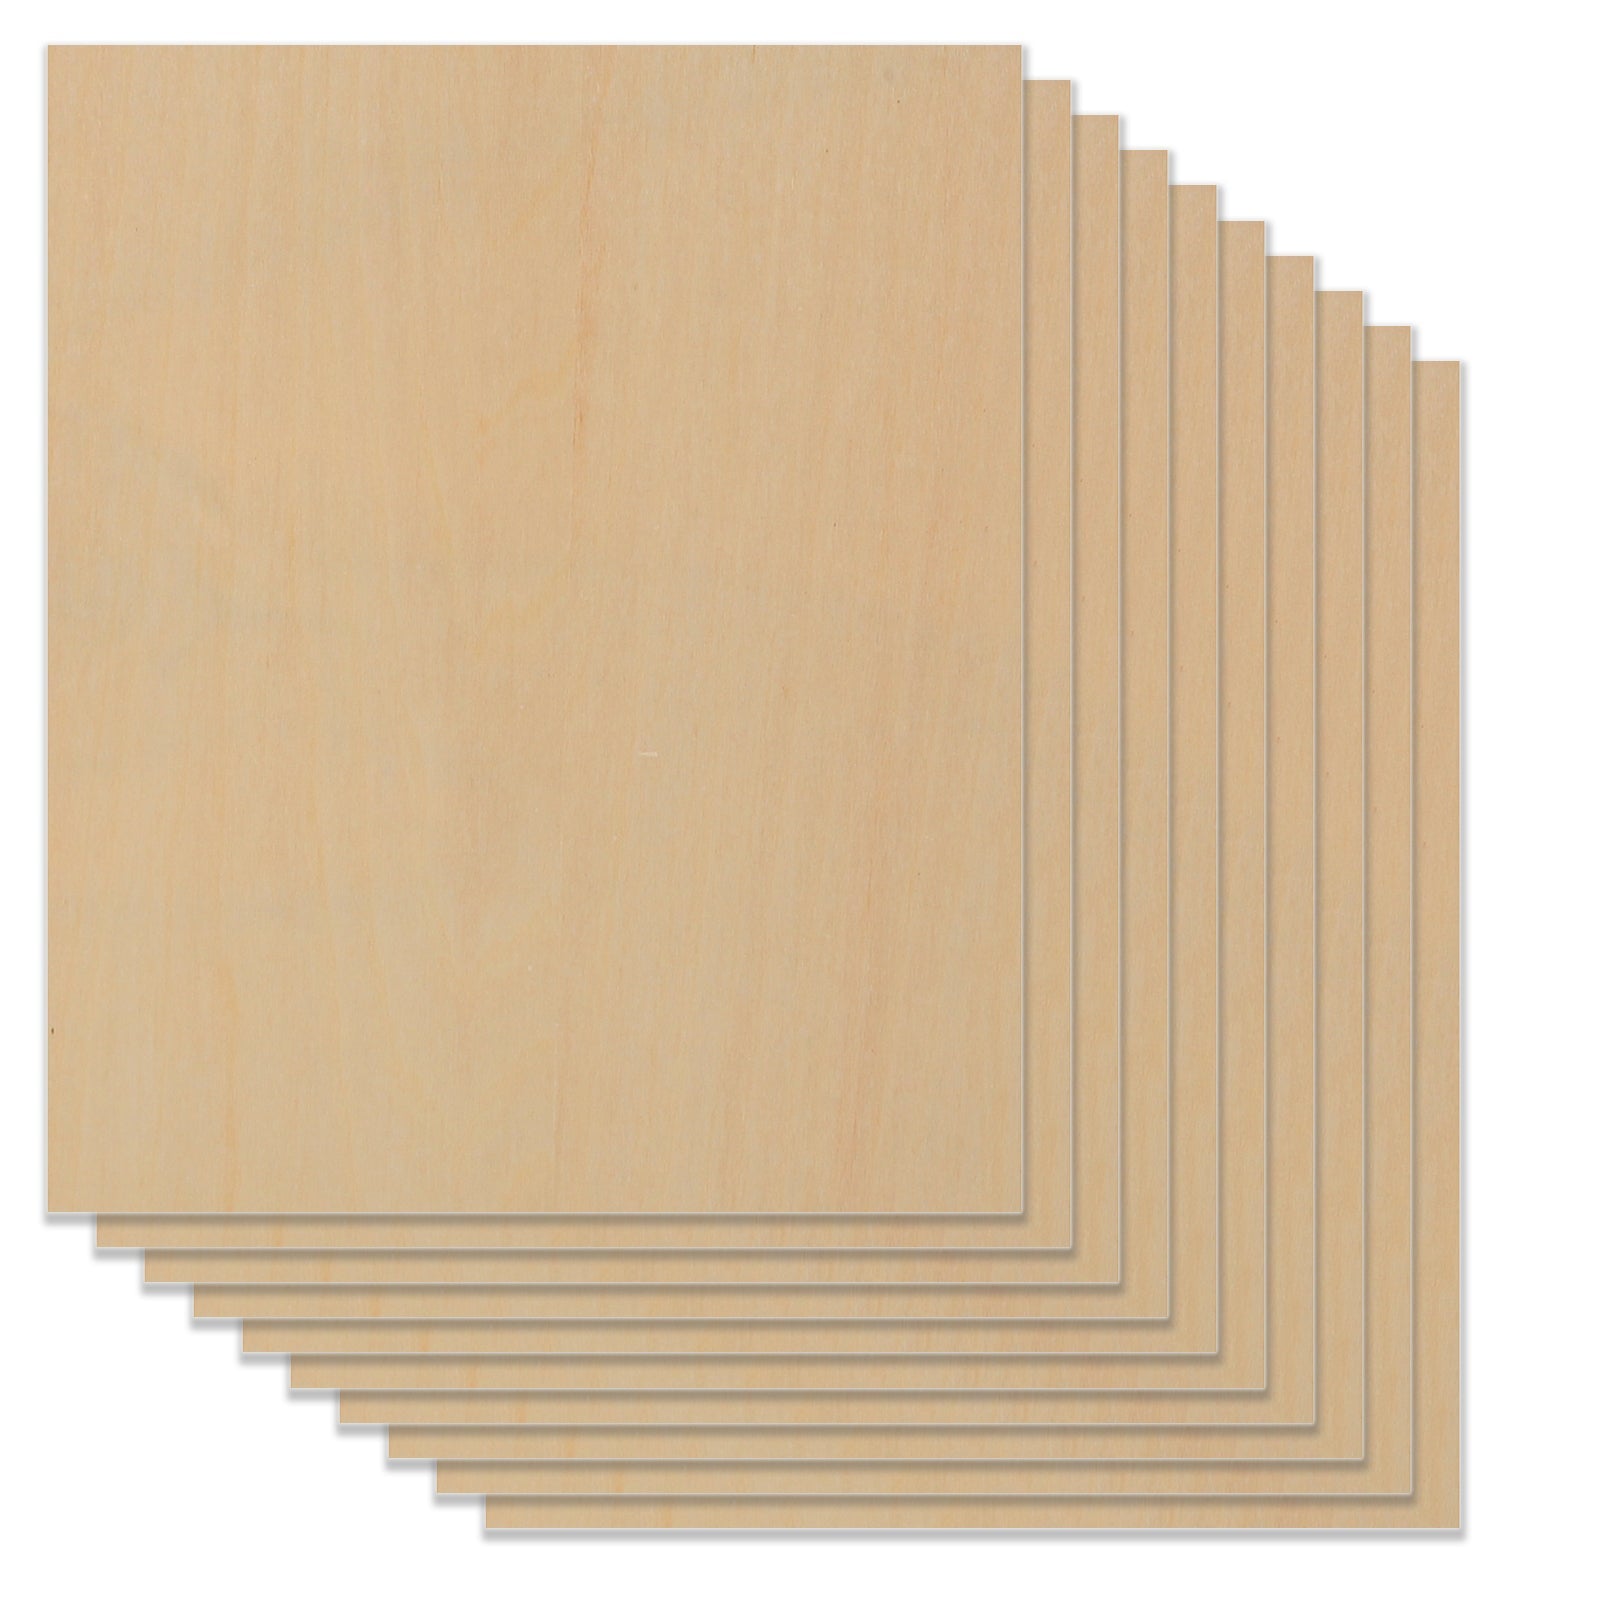 10pcs A3 Plywood Sheets 3mm Thickness (+/- 0.2mm) Basswood Plywood for Engraving